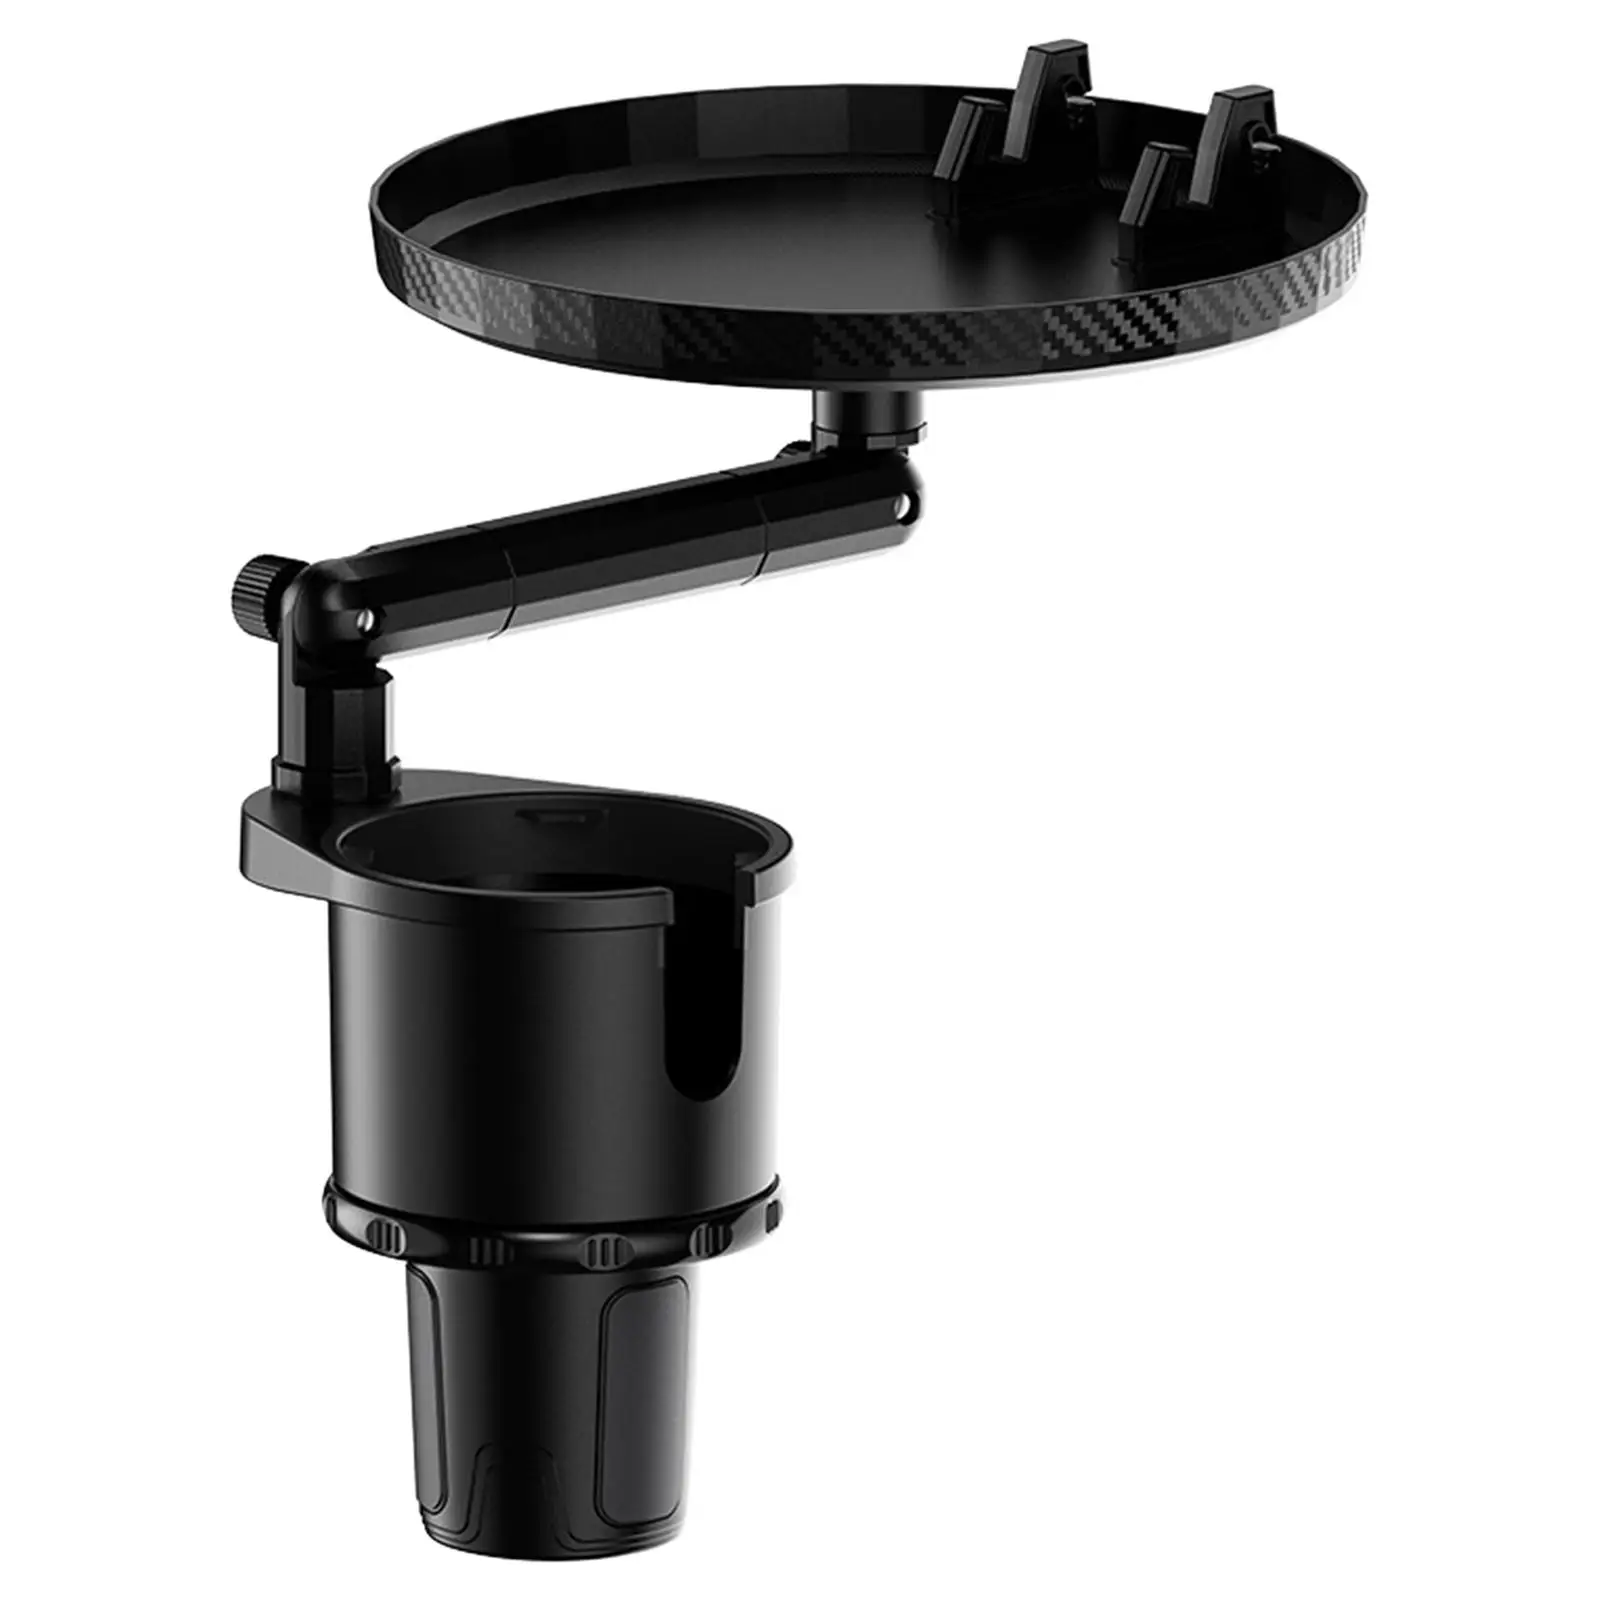 Universal Car Cup Holder Tray Insert 360 Rotating Detachable Food Tray for Drinks Bottle Fits Most Cars Organizer Black